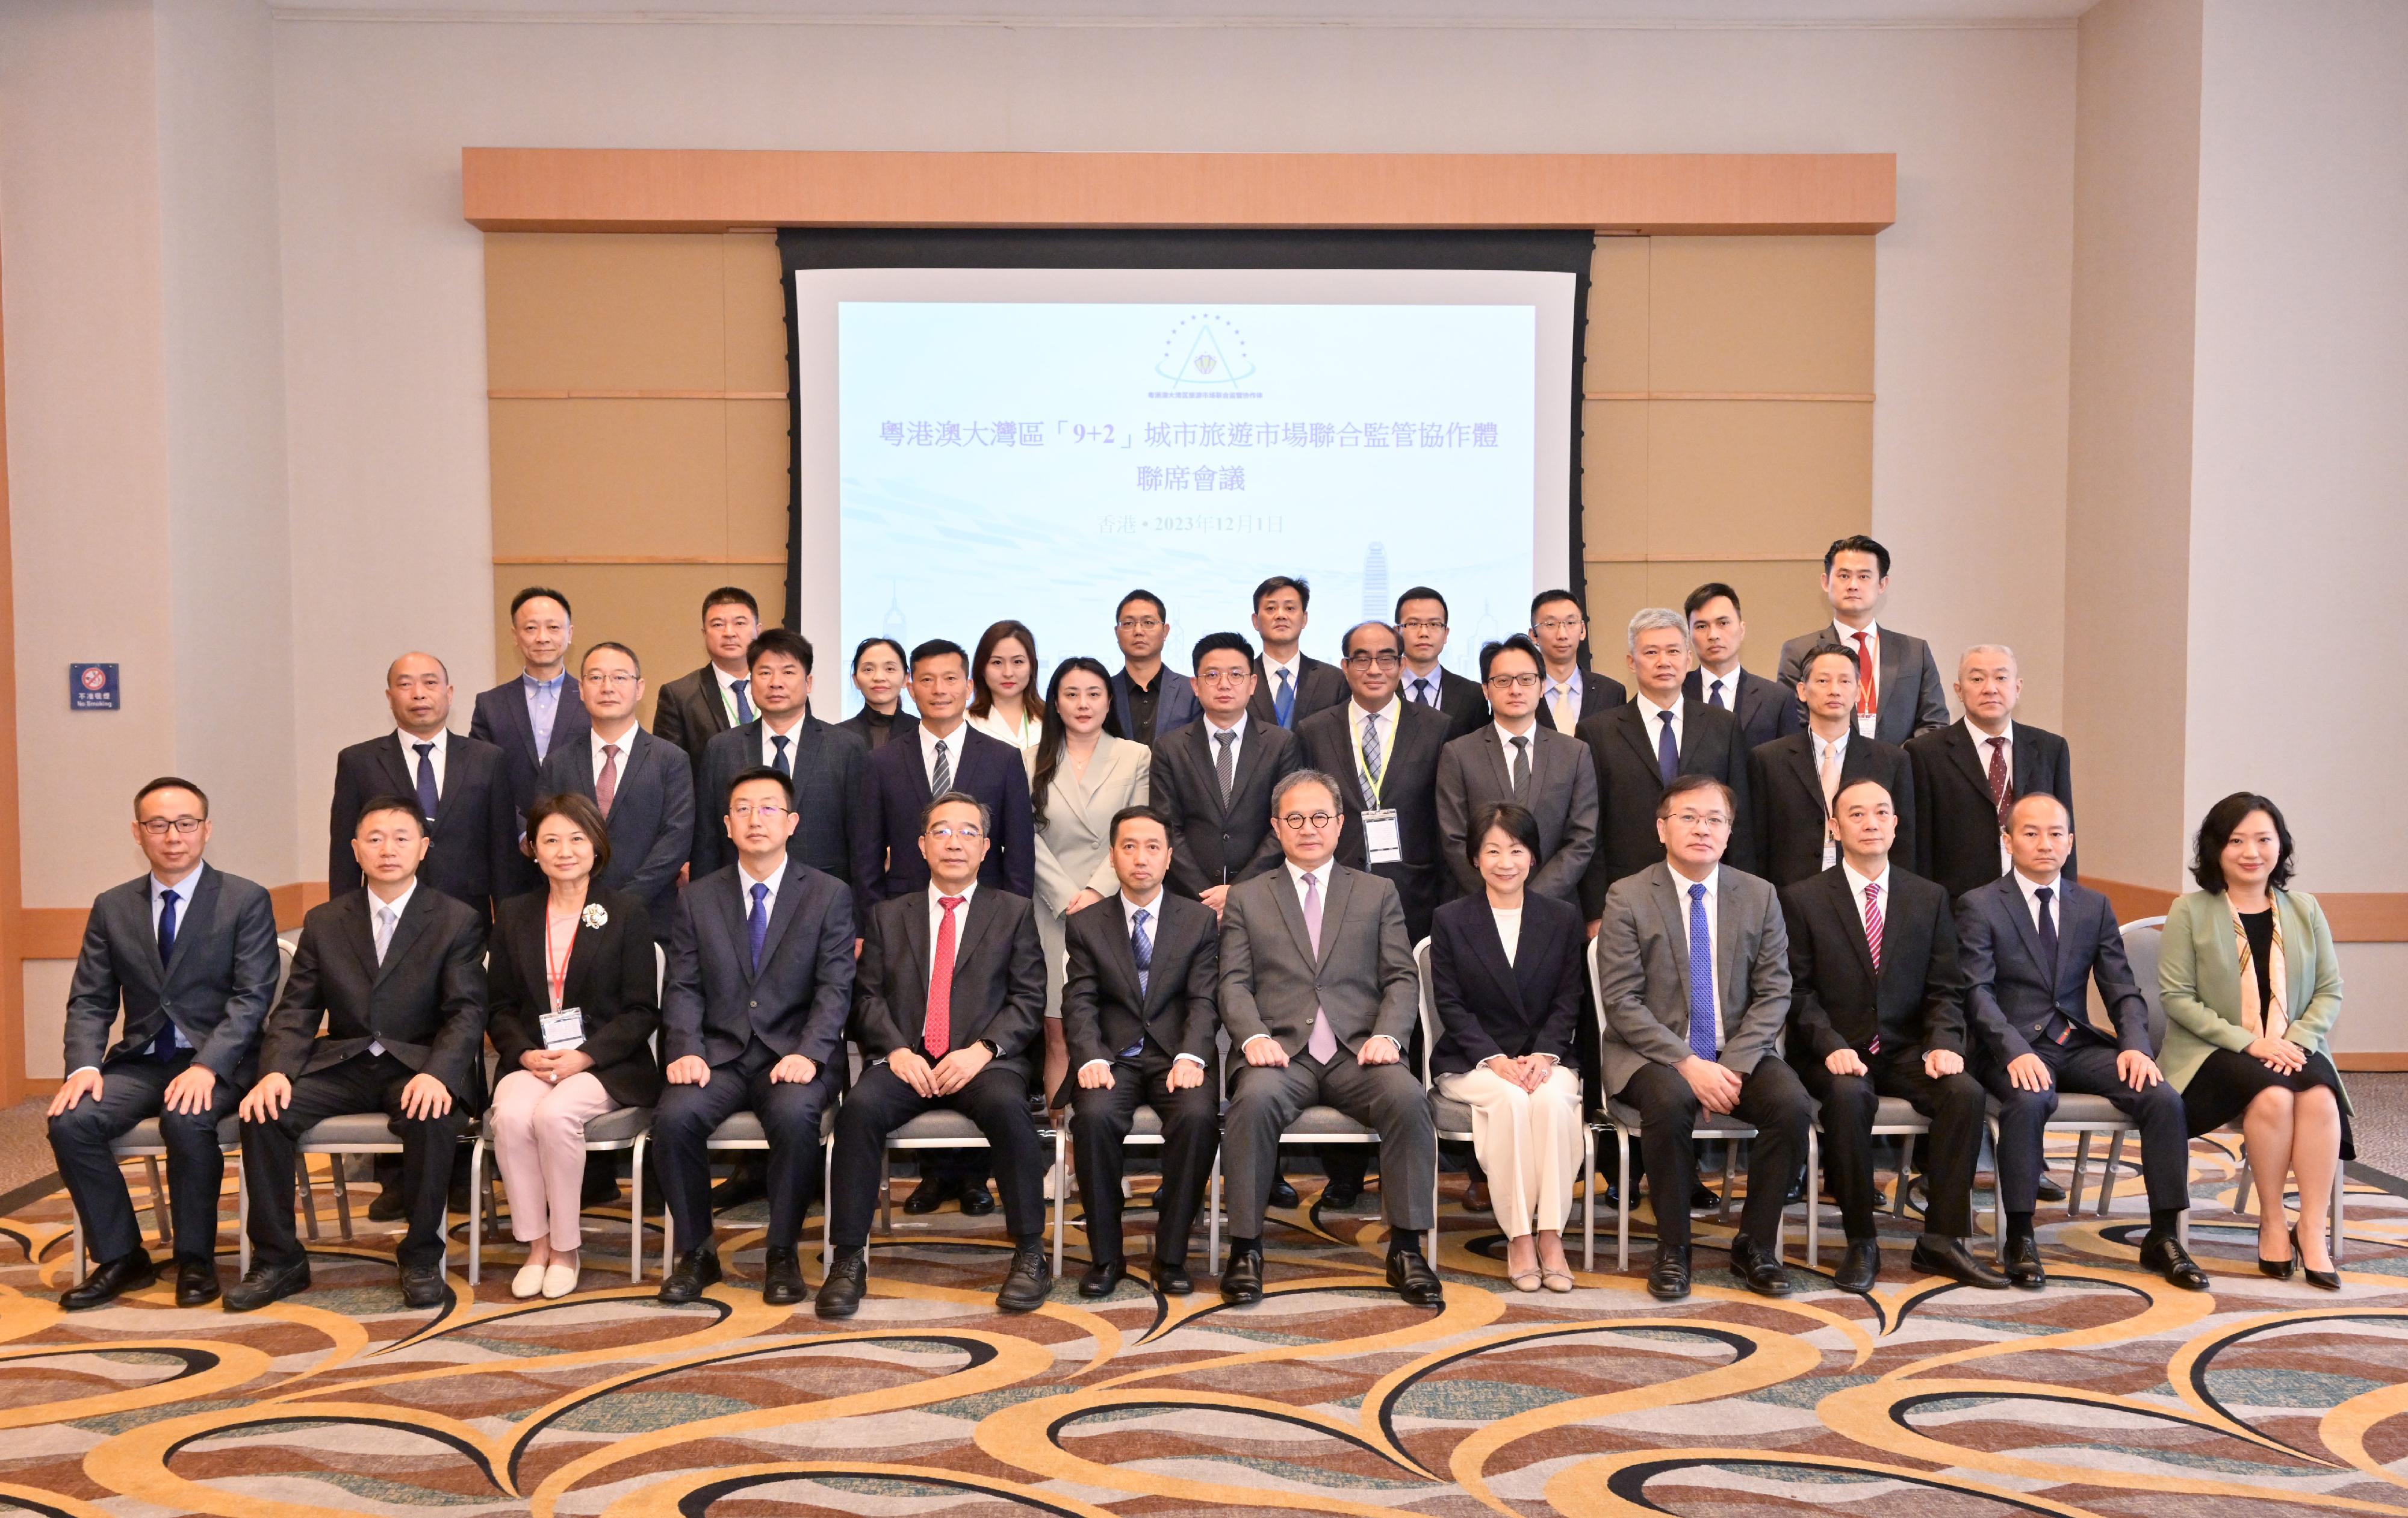 The joint meeting of the Joint Regulatory Alliance of the Tourism Market of 9+2 Cities in the Guangdong-Hong Kong-Macao Greater Bay Area (JRA) was held for two days in Hong Kong. Photo shows the Permanent Secretary for Culture, Sports and Tourism, Mr Joe Wong (sixth right, front row), and the Commissioner for Tourism, Ms Vivian Sum (fifth right, front row), and representatives of the JRA today (December 1).